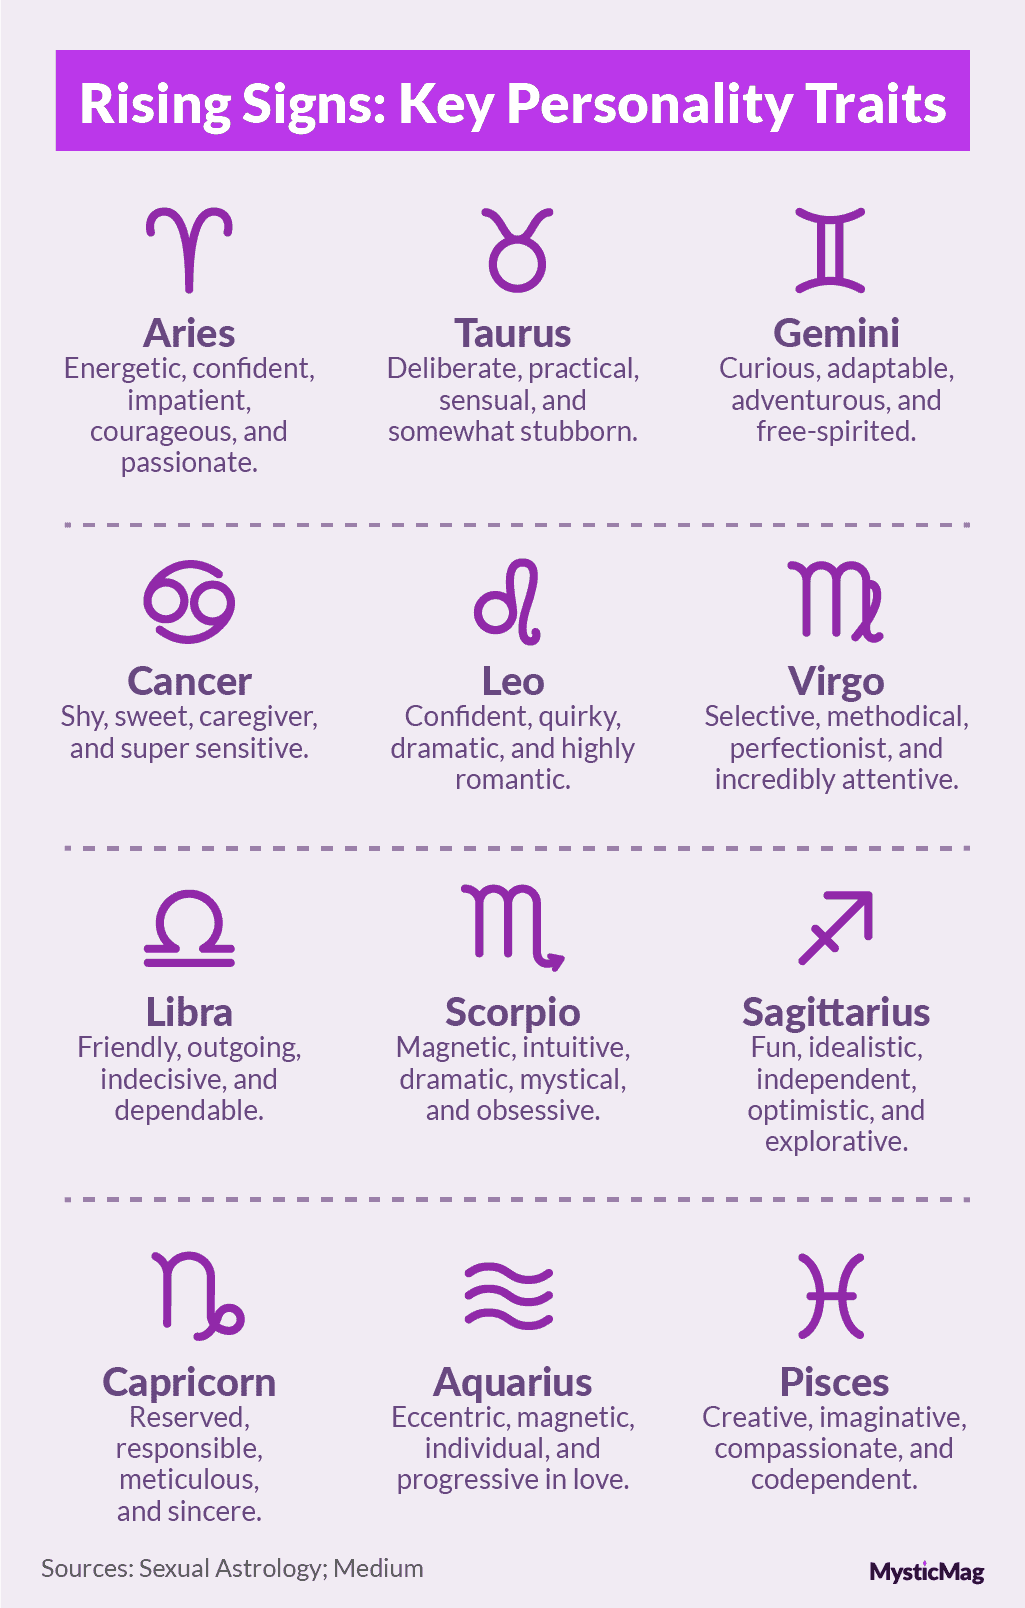 Your Dating Style, According to Your Rising Sign